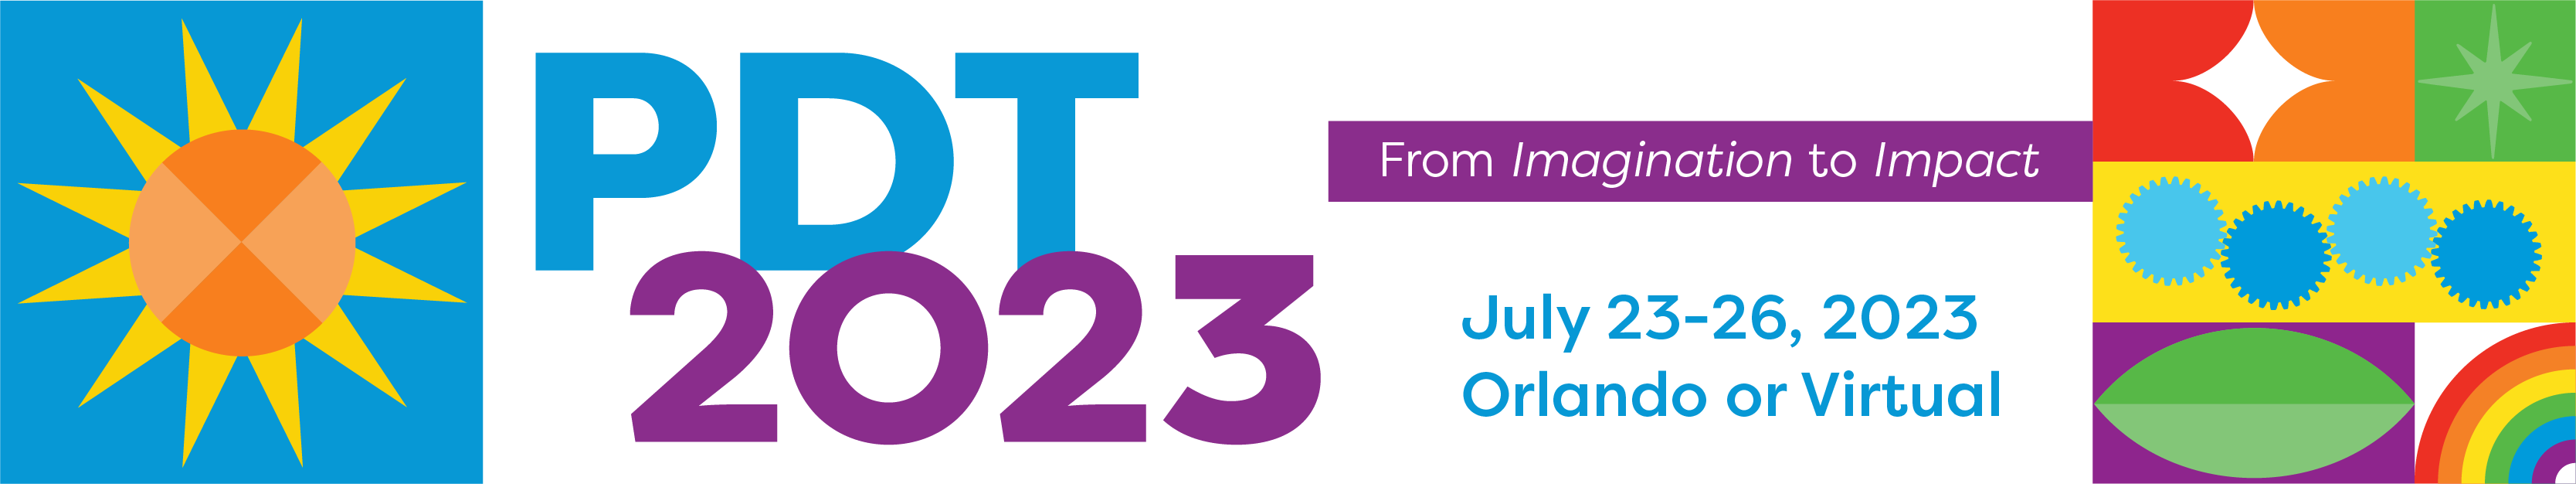 PDT 2023 "From Imagination to Impact" July 23-26, 2023 Orlando or Virtual